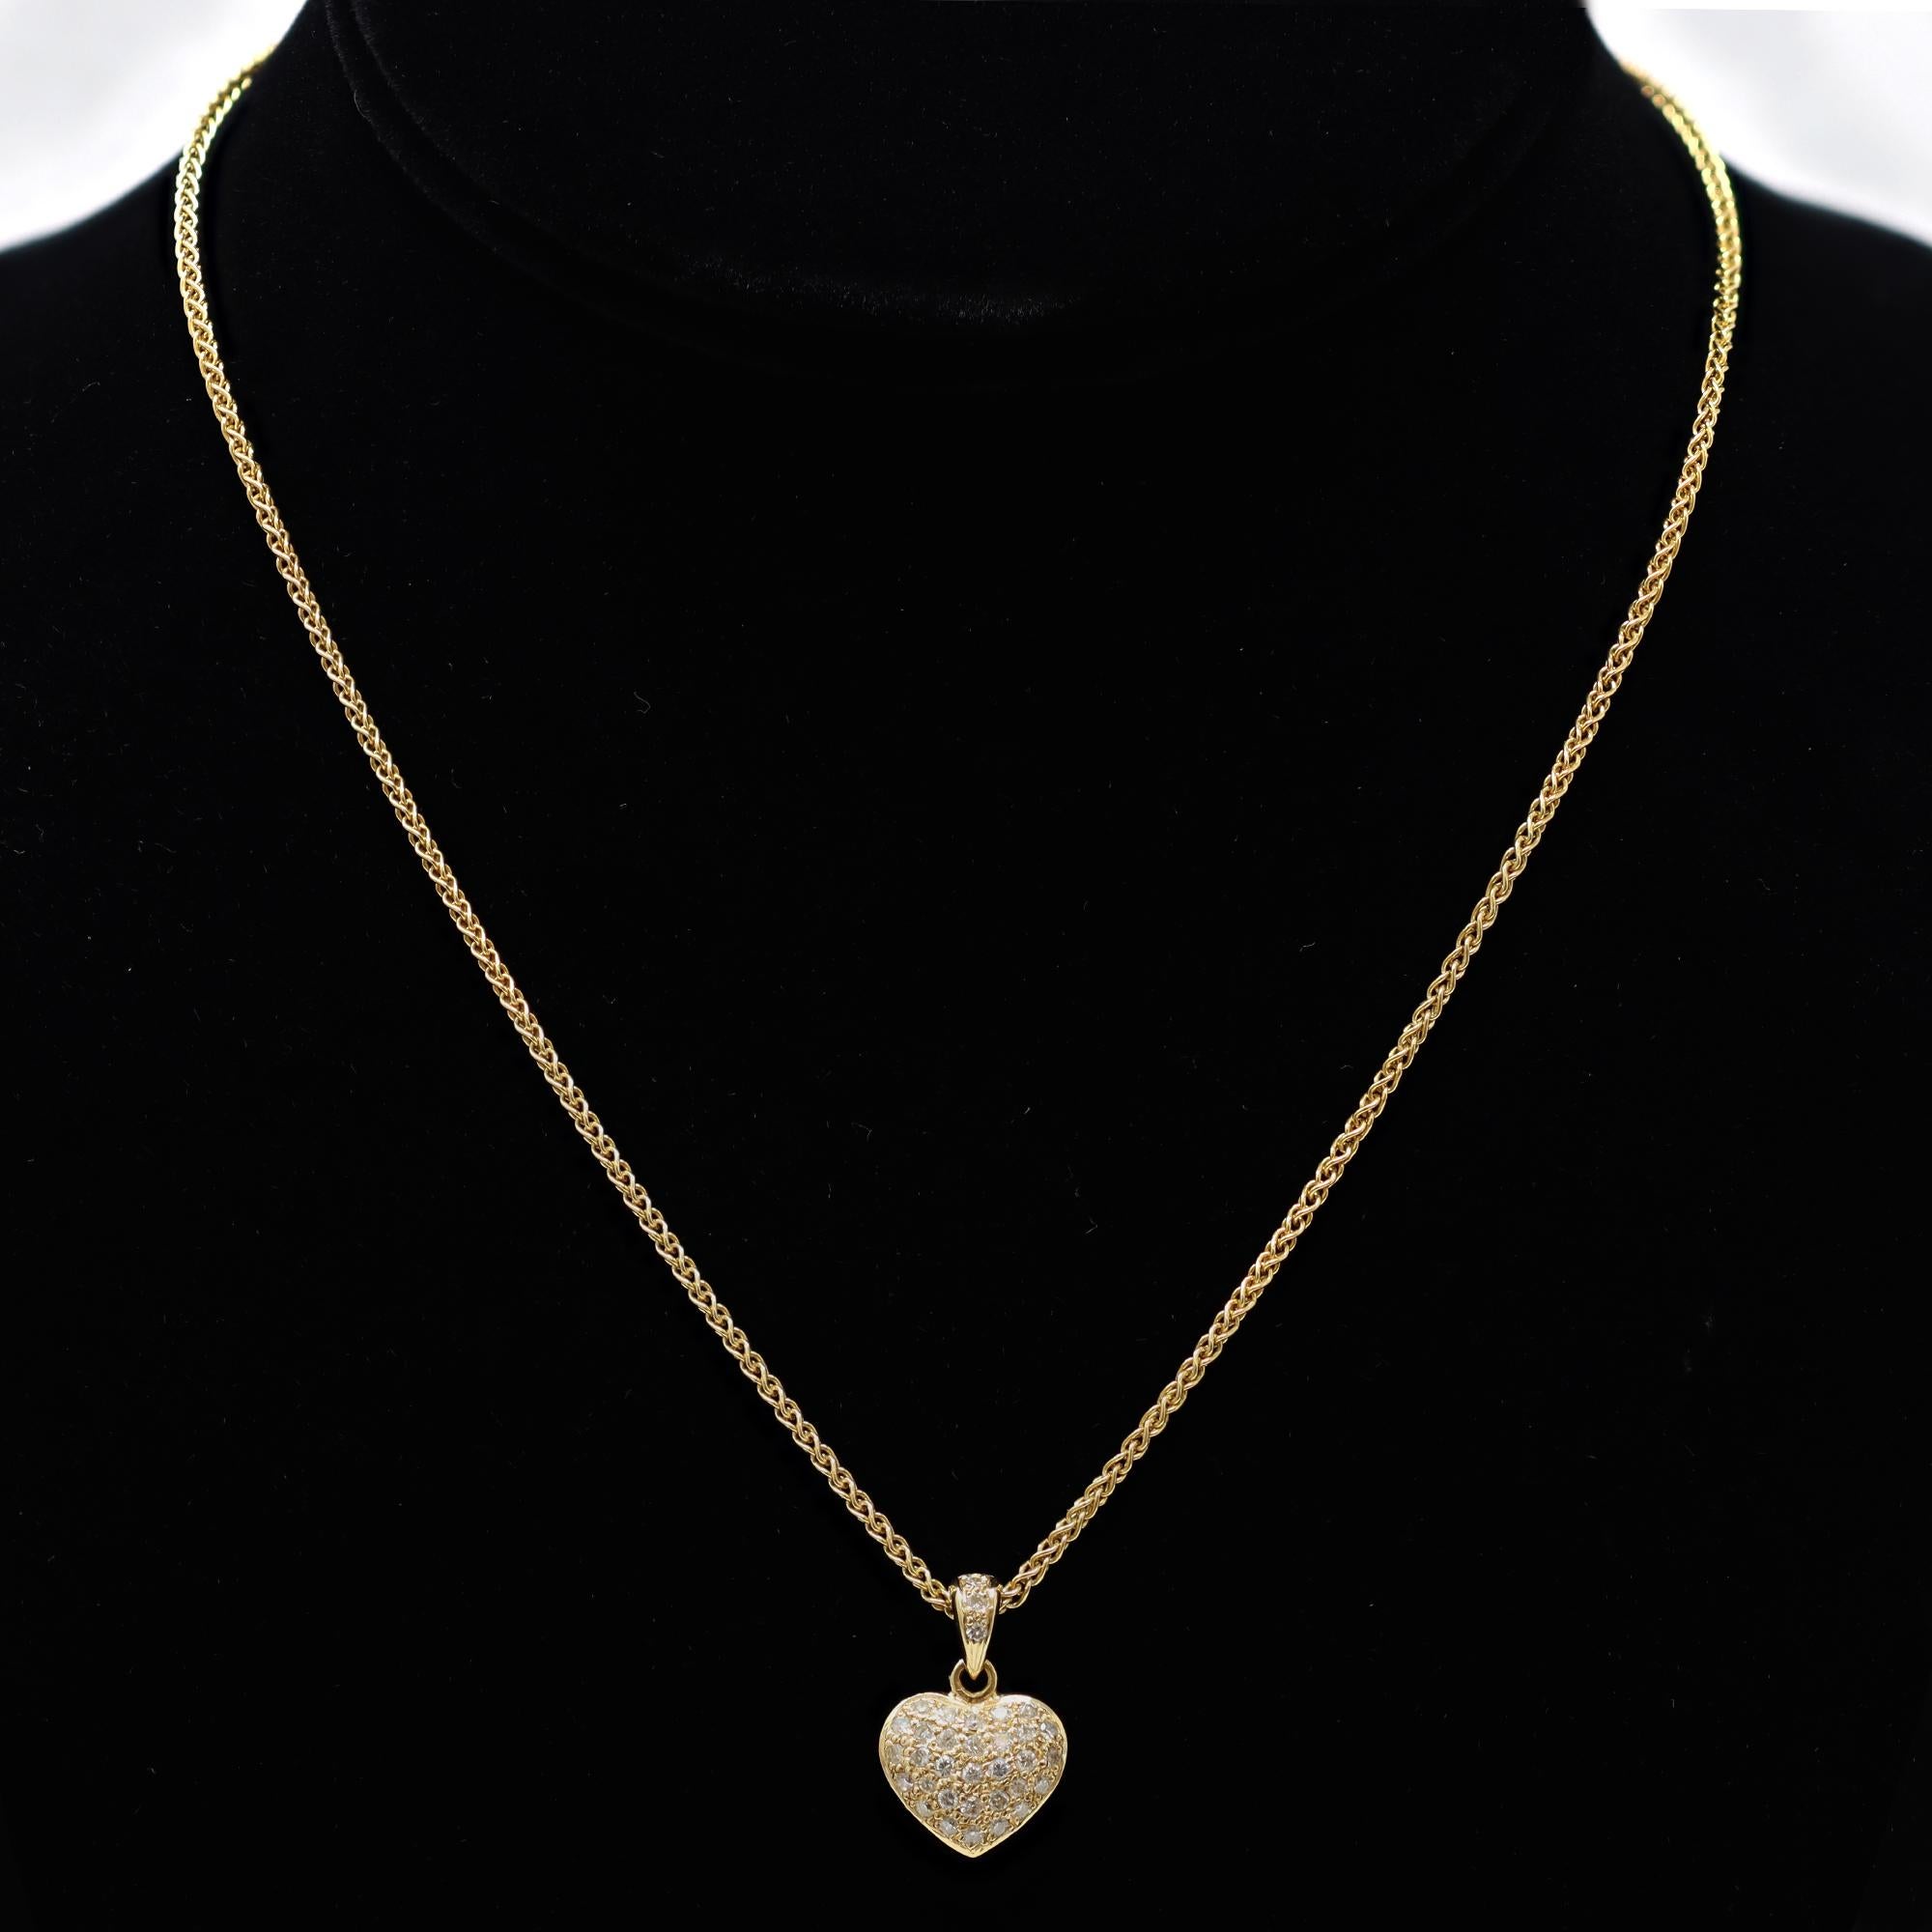 18 karat yellow gold diamond heart pendant necklace In Excellent Condition For Sale In Miami, FL